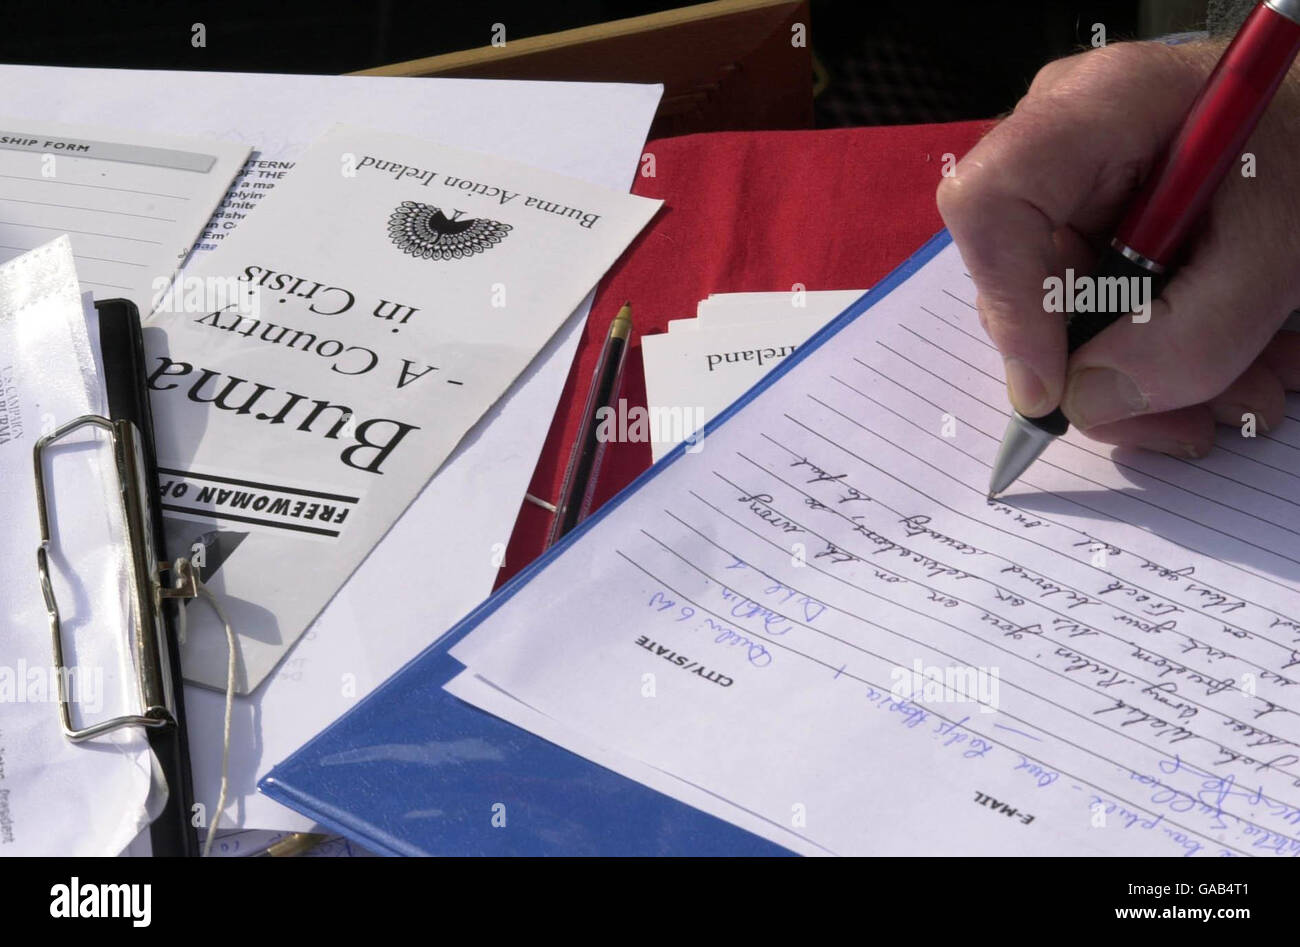 Supporters of the Burma pro-democracy movement sign a petition at a rally in Dublin's O'Connell Street. Stock Photo